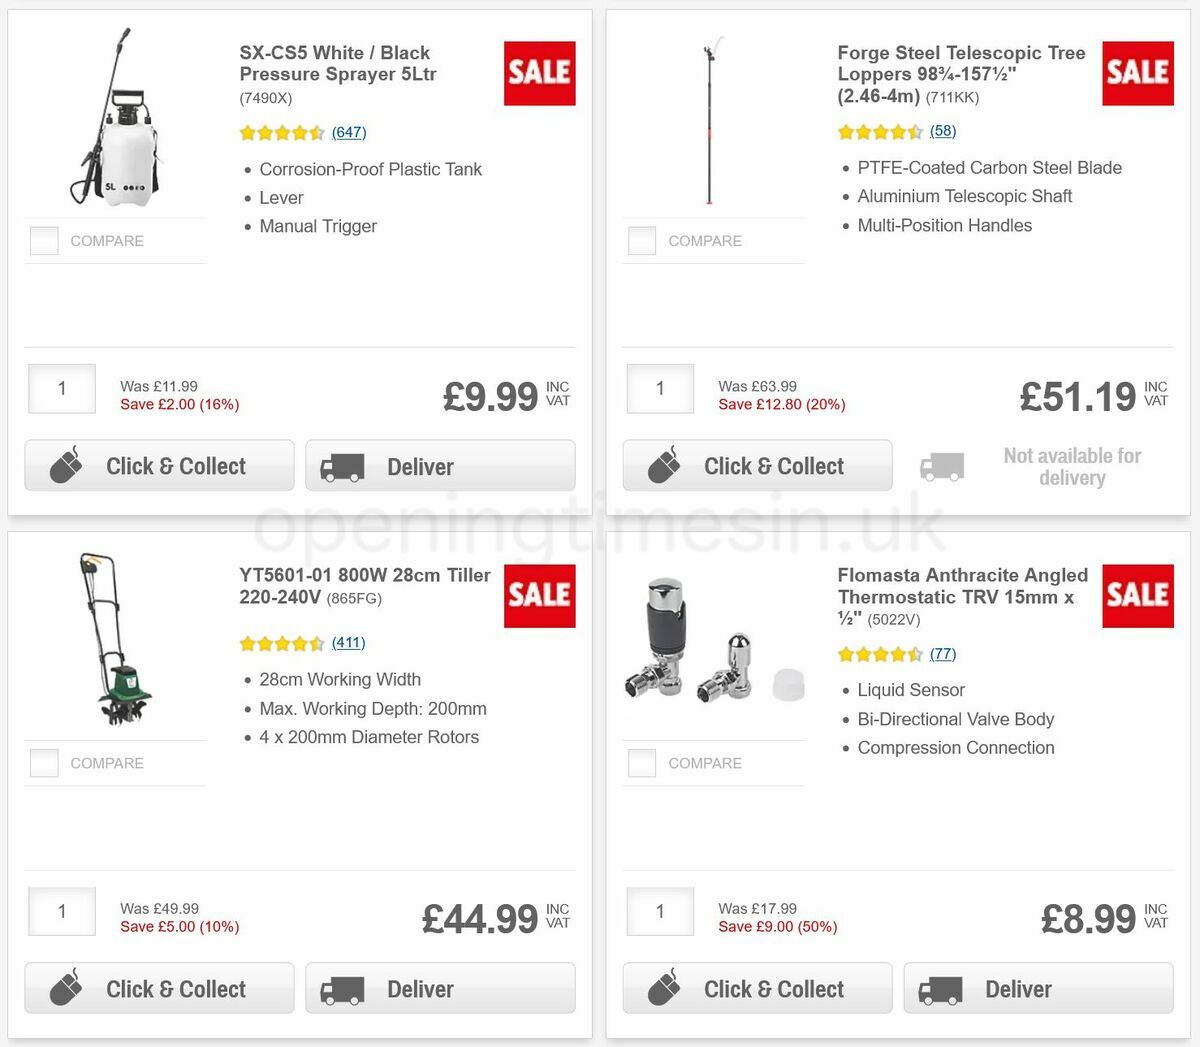 Screwfix Offers from 29 July